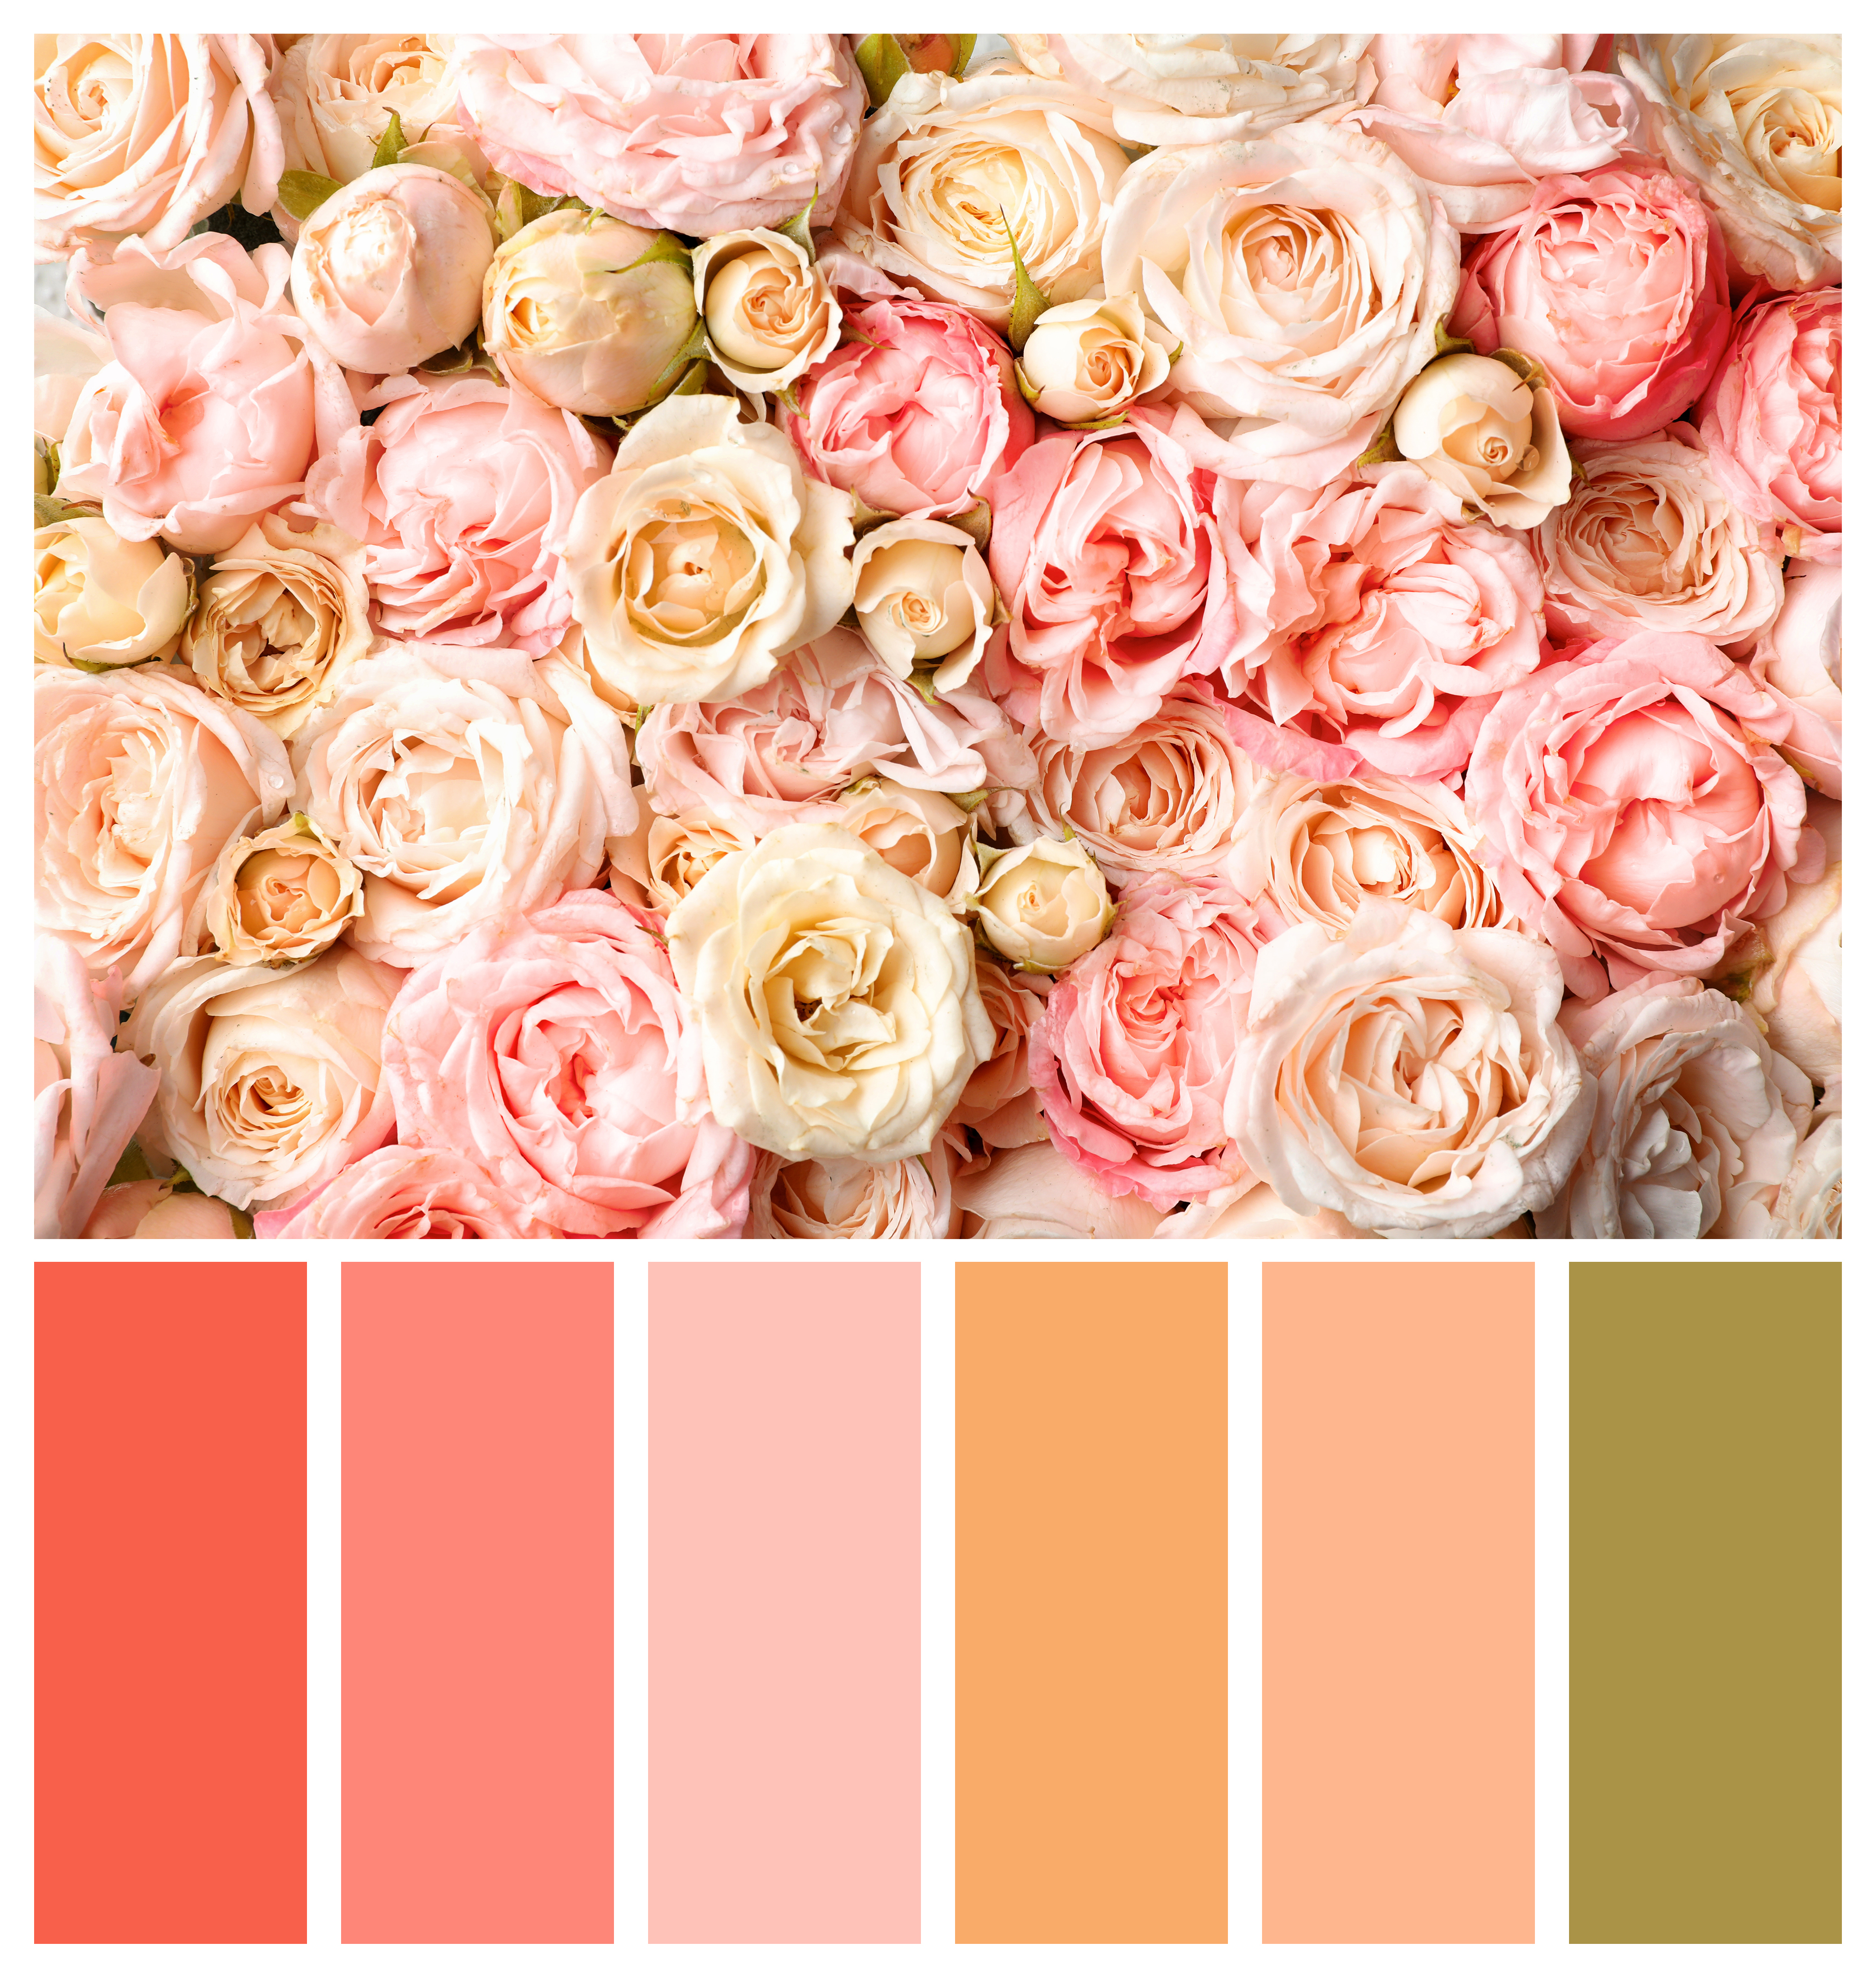 How to find the perfect wedding color for you?